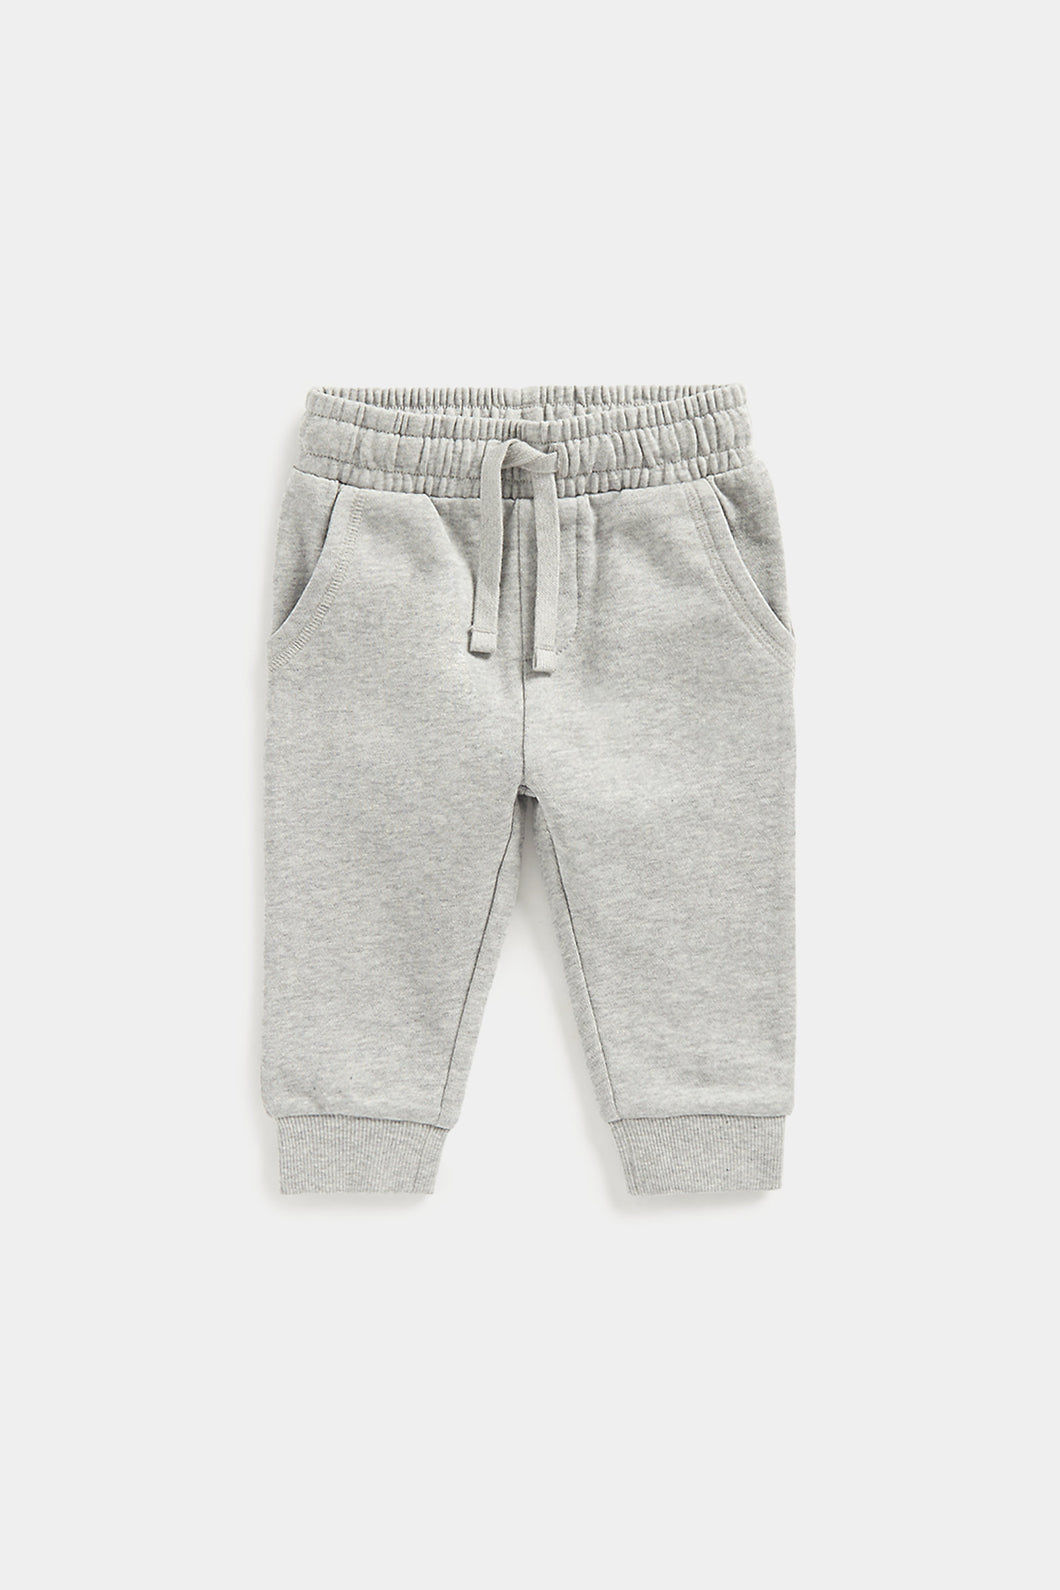 Mothercare Grey Joggers